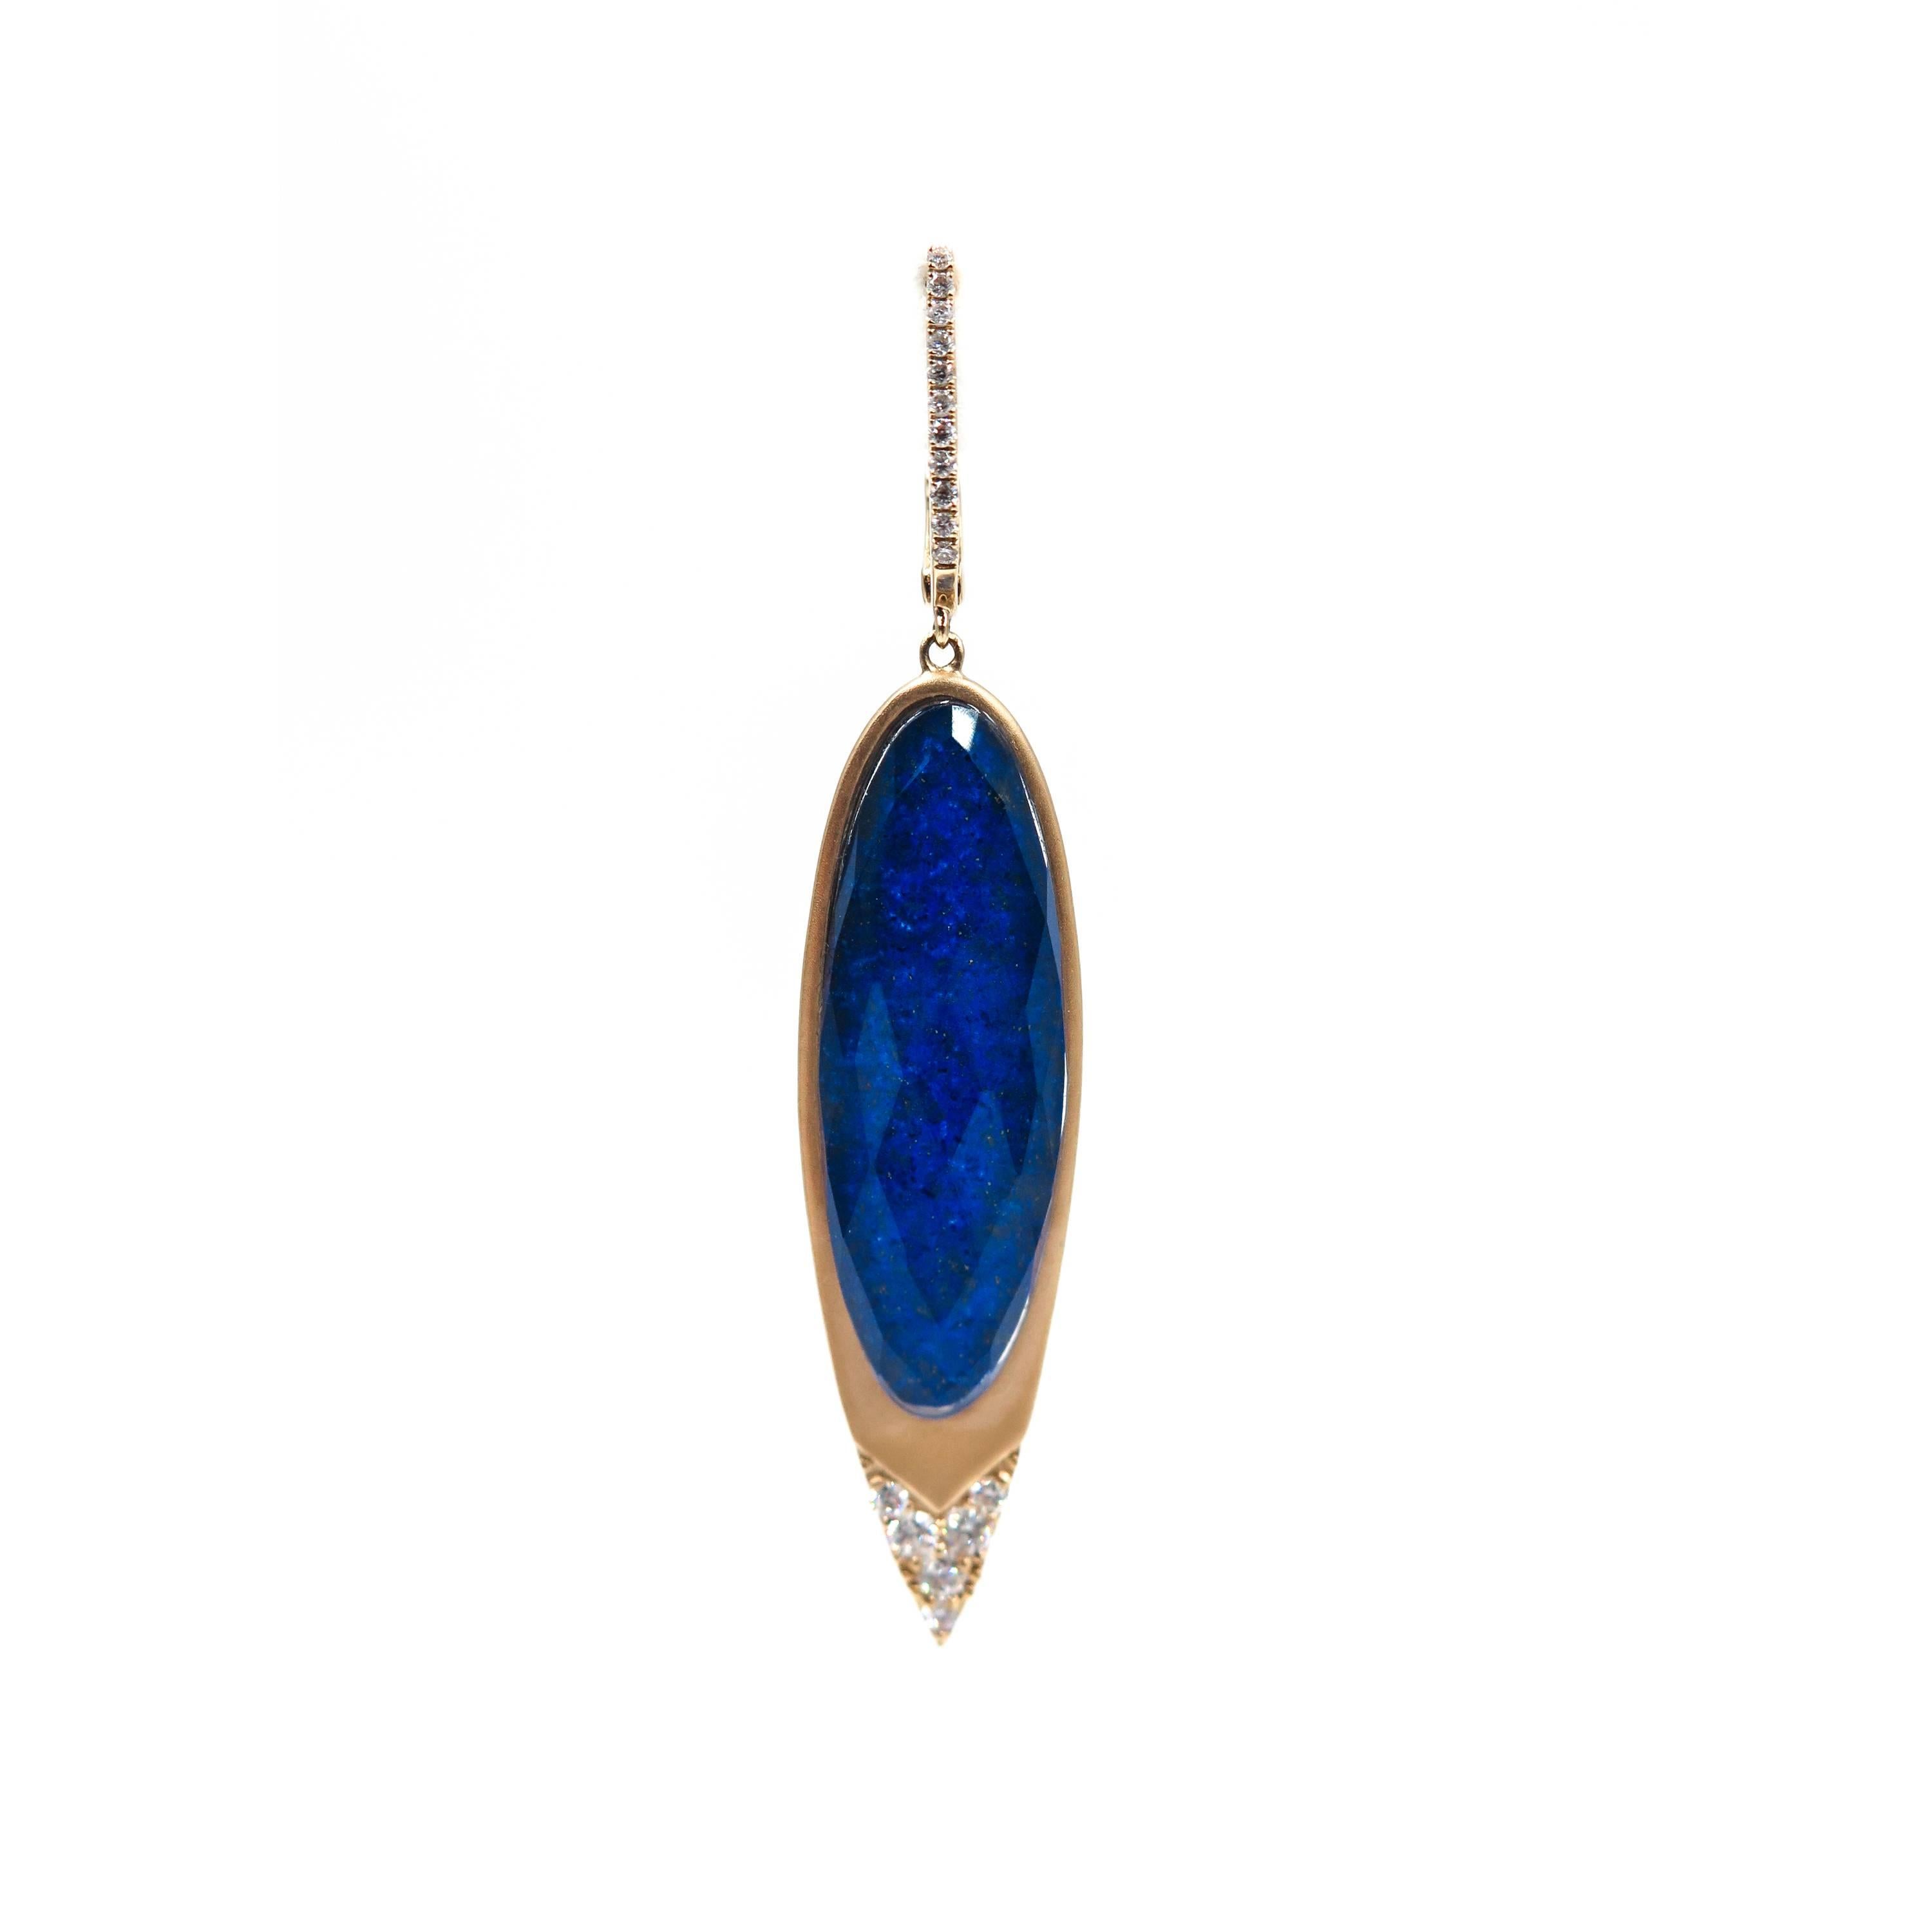 Inspired by the starry sky, this royal blue lapis lazuli base is layered with checker-cut clear quartz, shimmering like stars in a night sky. 
This gorgeous Lapis and Diamond Drop Earrings are expertly crafted in 18k yellow gold and accented with 34